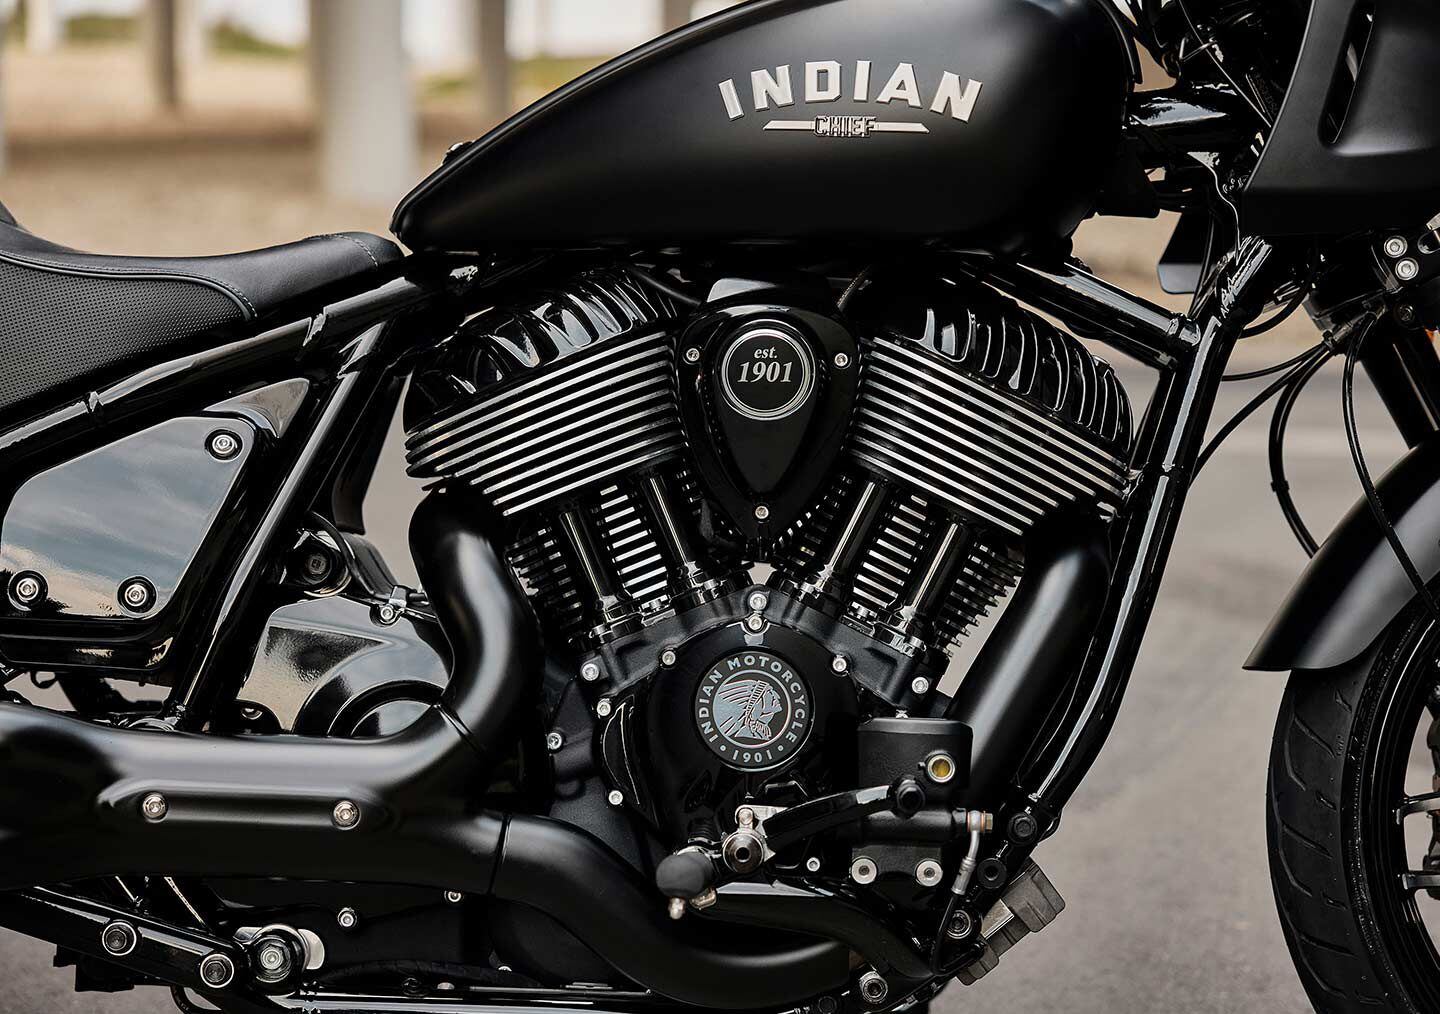 Air-cooled and blacked out, the Thunderstroke 116 engine carries over from the Chief Dark Horse unchanged.